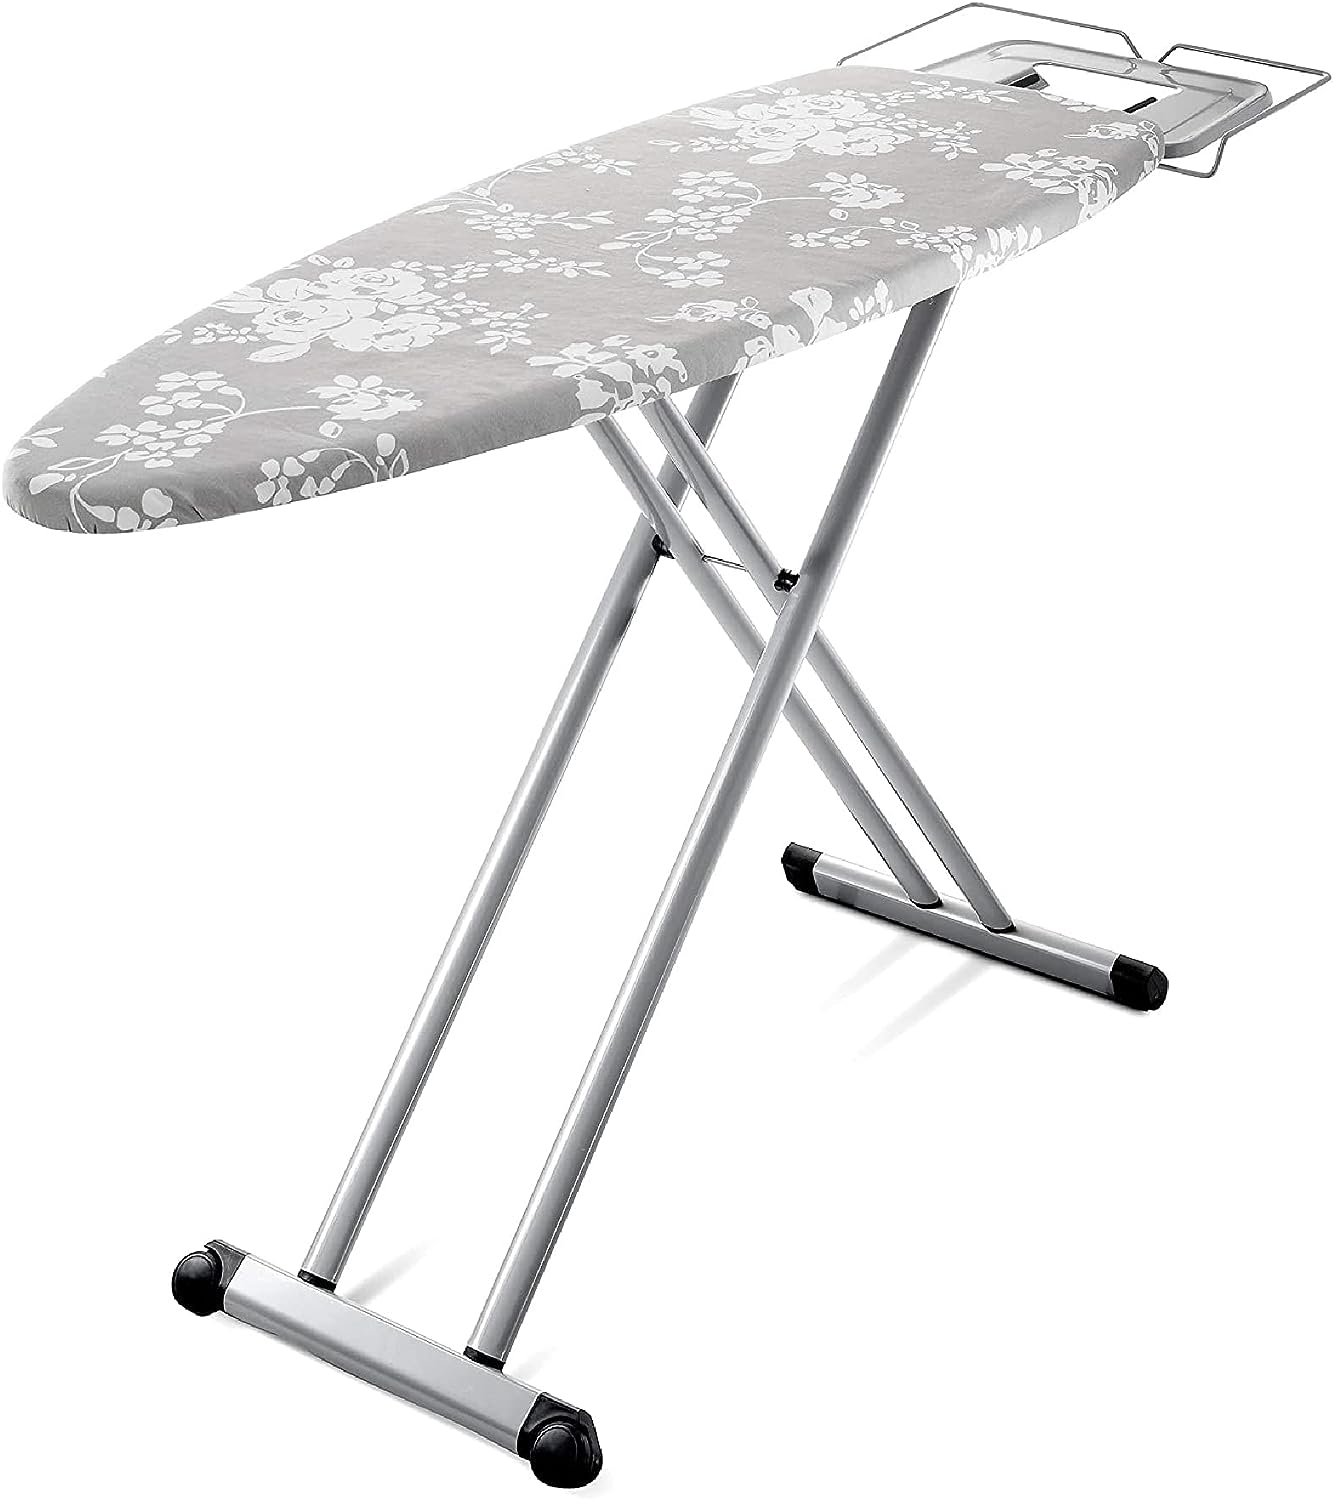 Bartnelli Pro Luxury Ironing Board - Extreme Stability, Made in Europe, Steam Iron Rest, Adjustable Height, Foldable, European Made